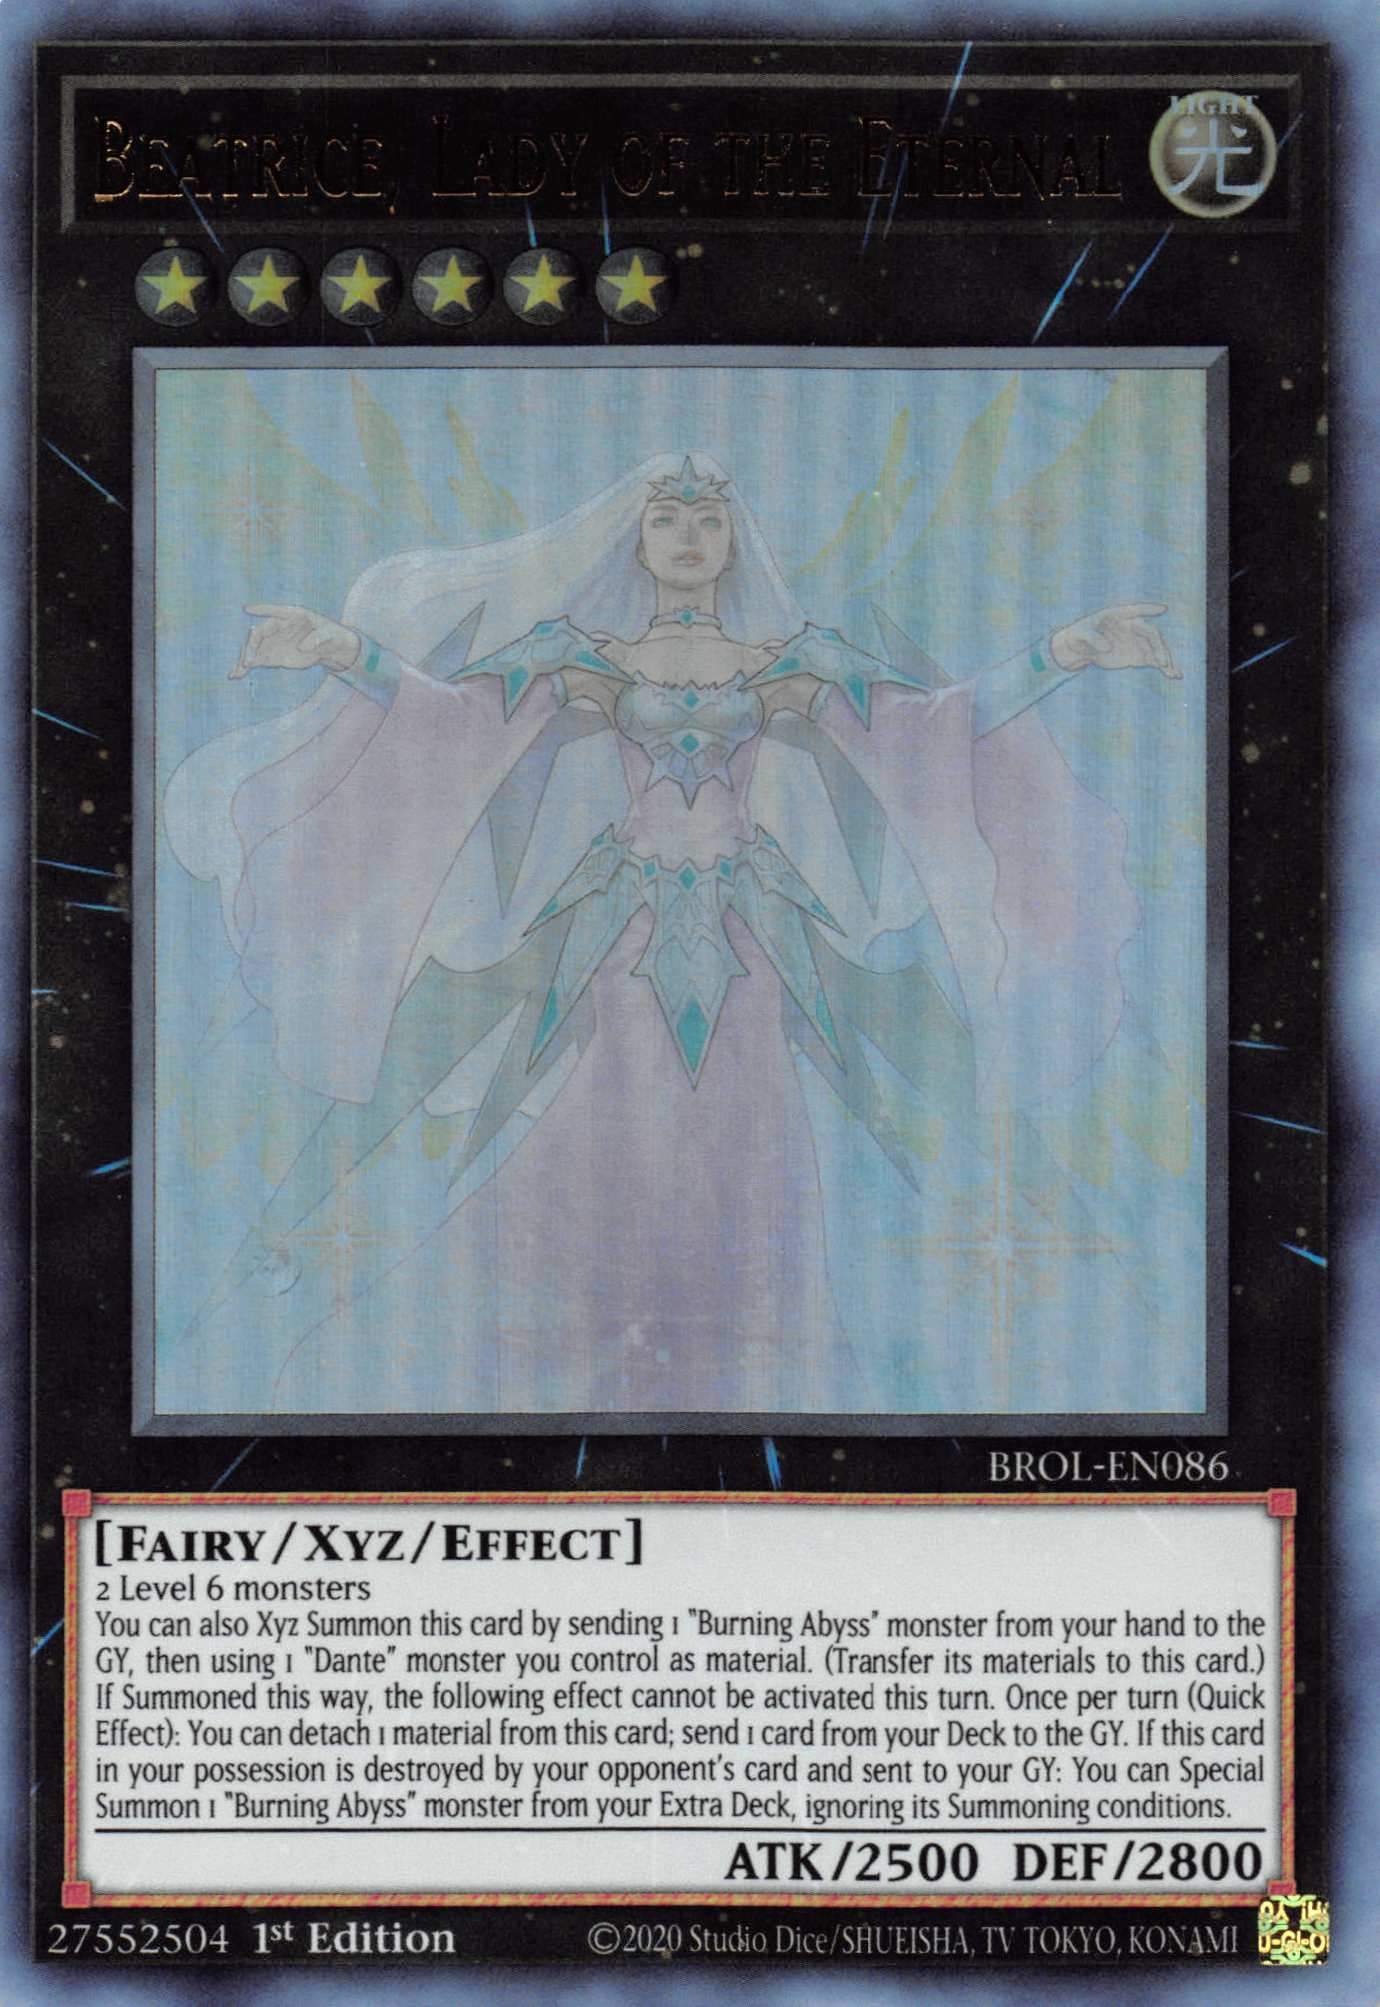 Beatrice, Lady of the Eternal [BROL-EN086] Ultra Rare | Jomio and Rueliete's Cards and Comics